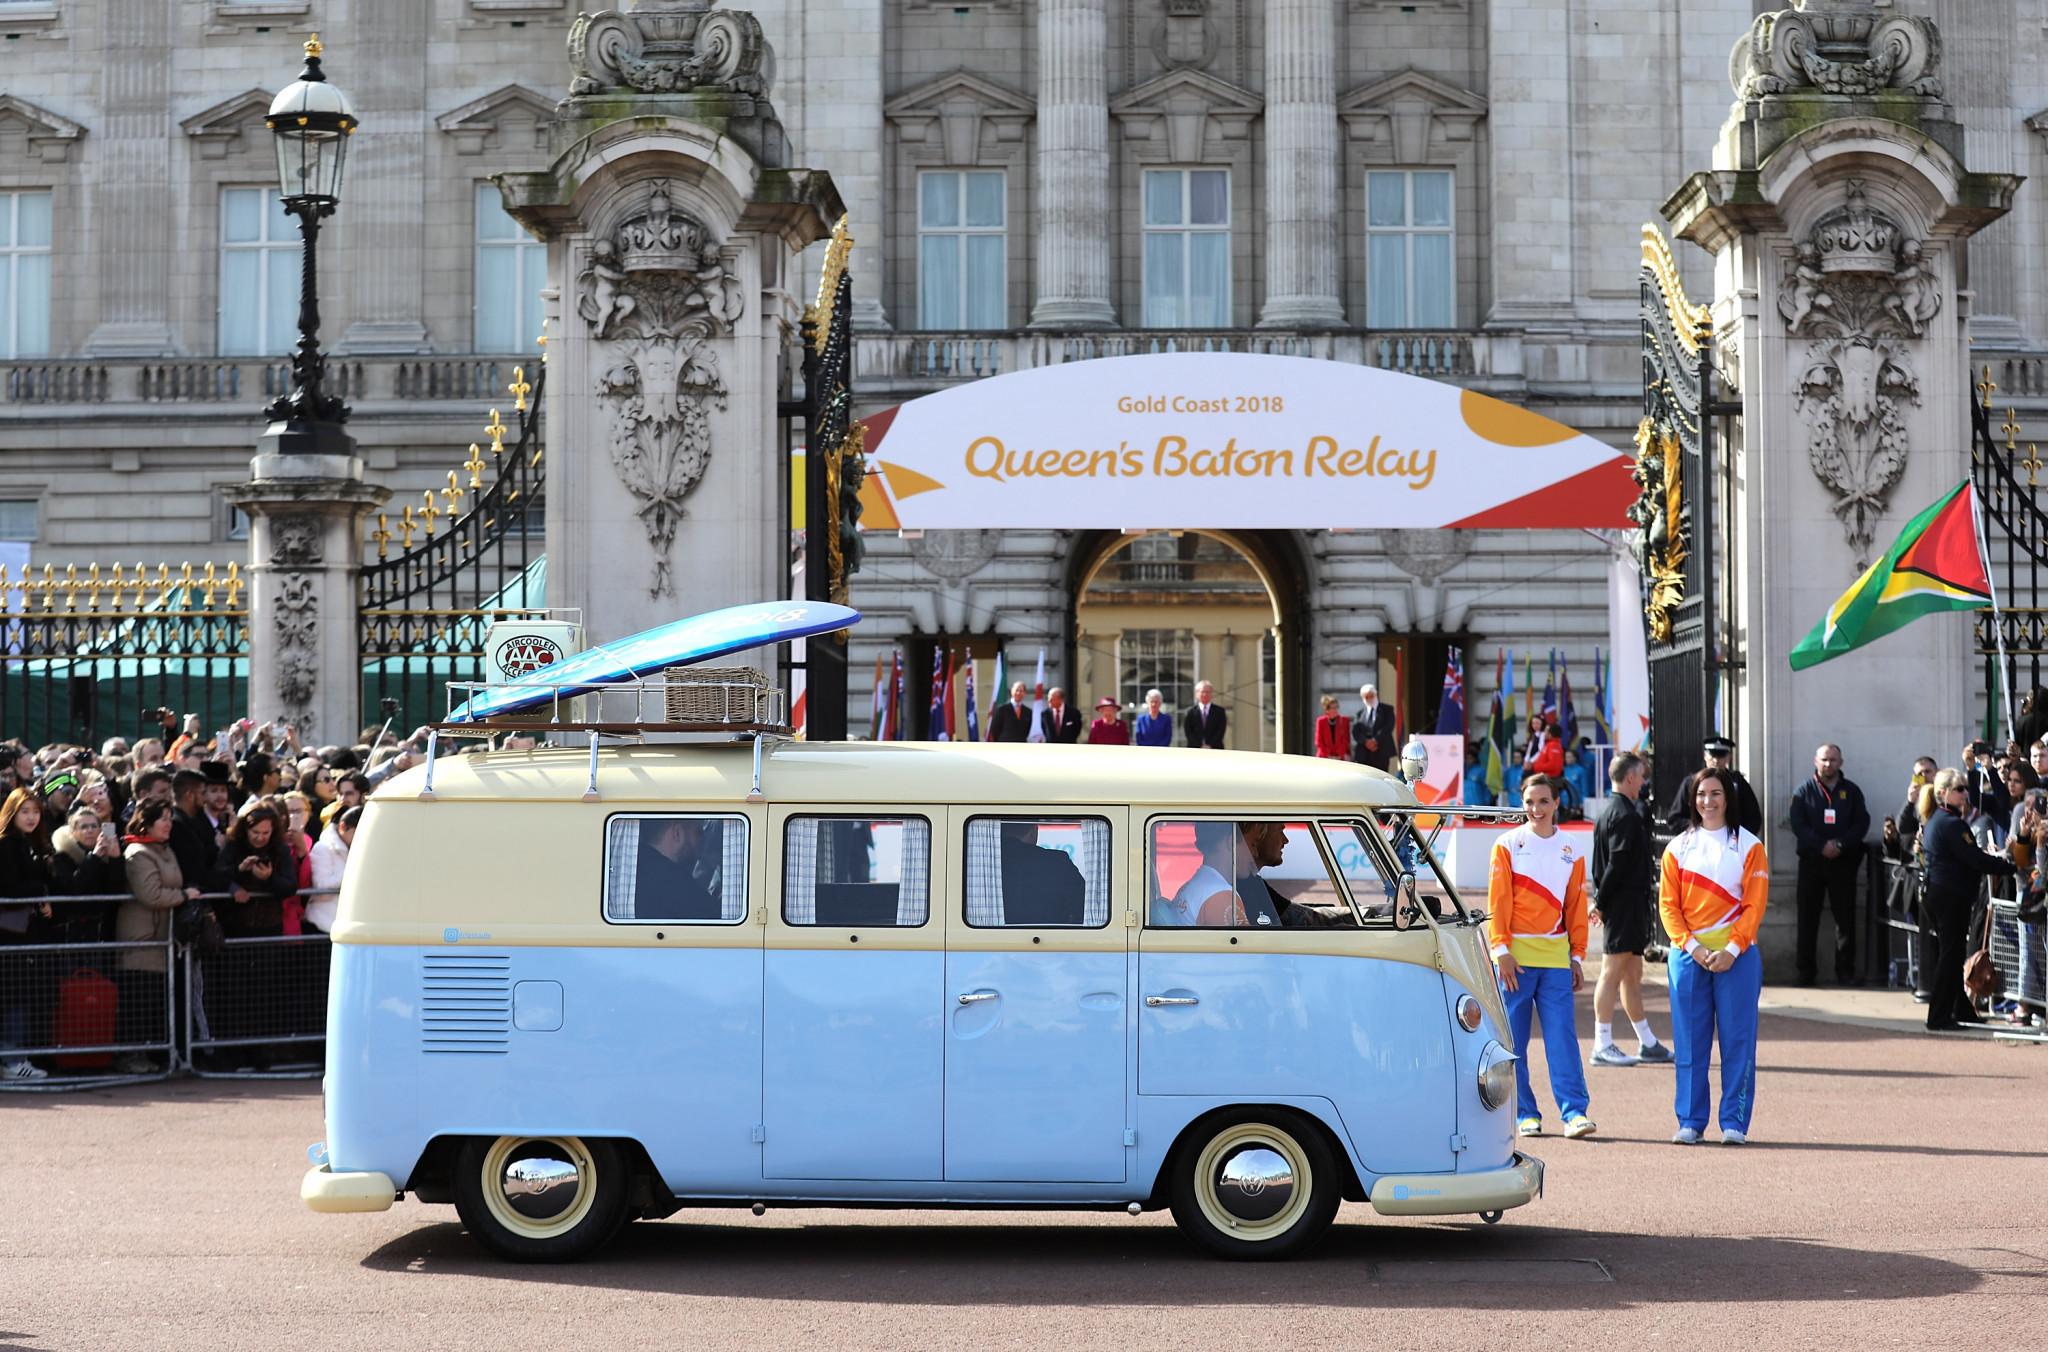 A camper van was given prominence when the Gold Coast 2018 Baton Relay began at Buckingham Palace ©Getty Images